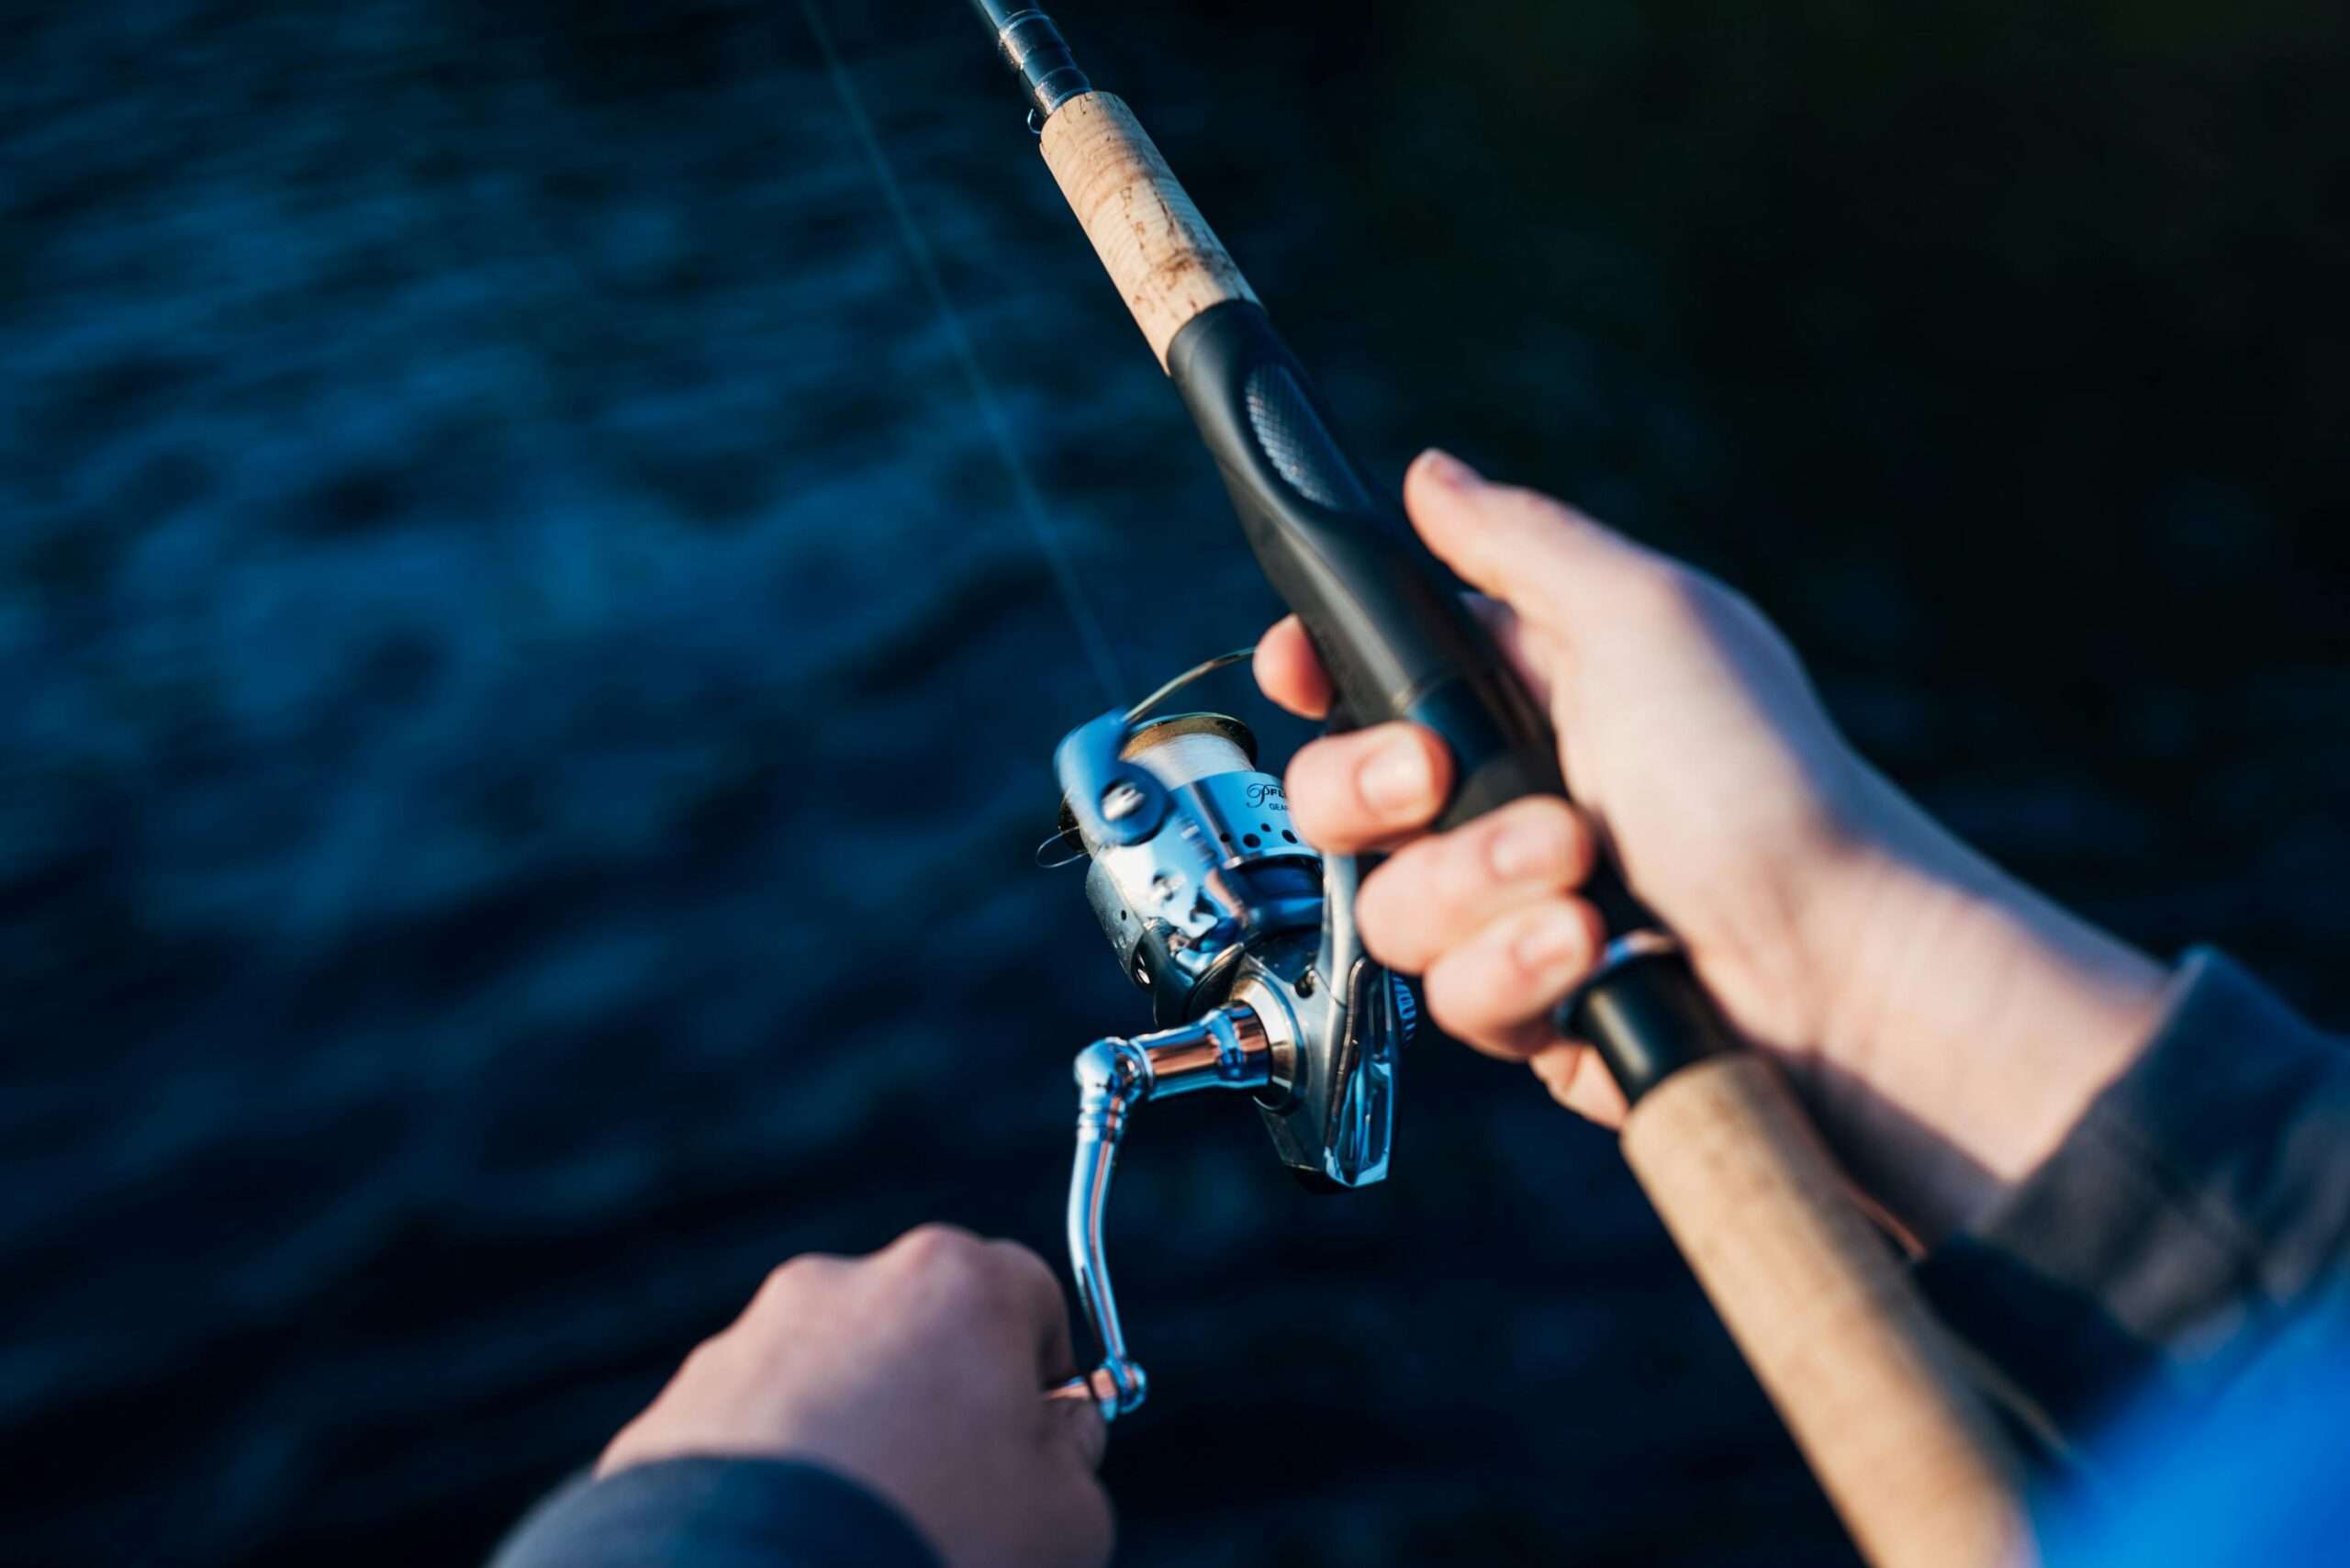 An Anglers Guide: Tips & Tricks for Catching More Fish